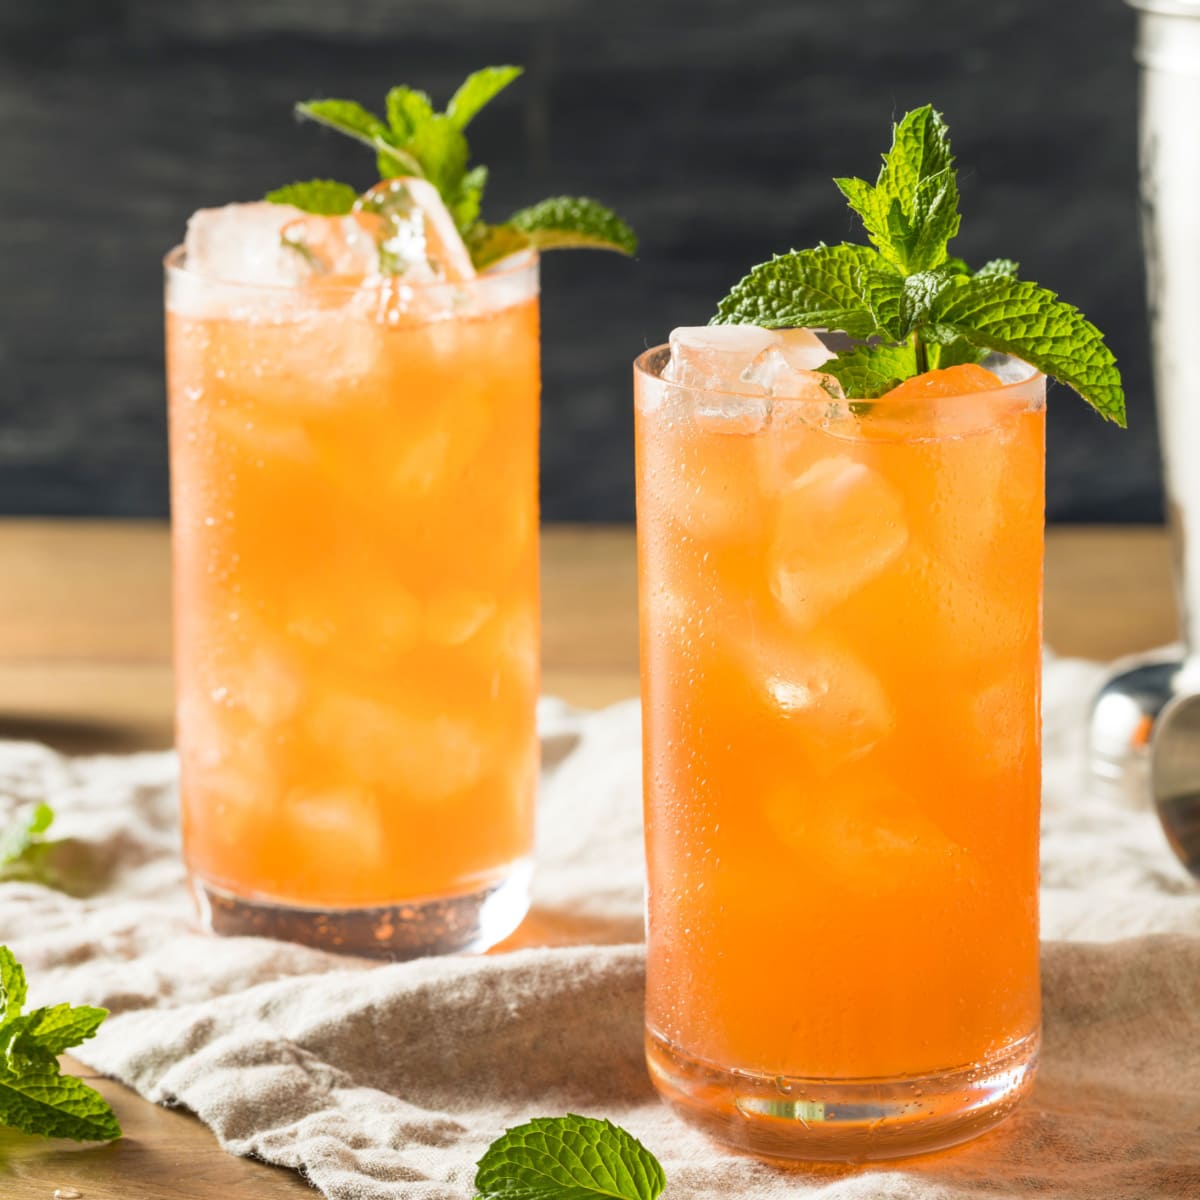 Two glasses of orangey cocktail on a tall glass filled with ice garnished with mint leaves.